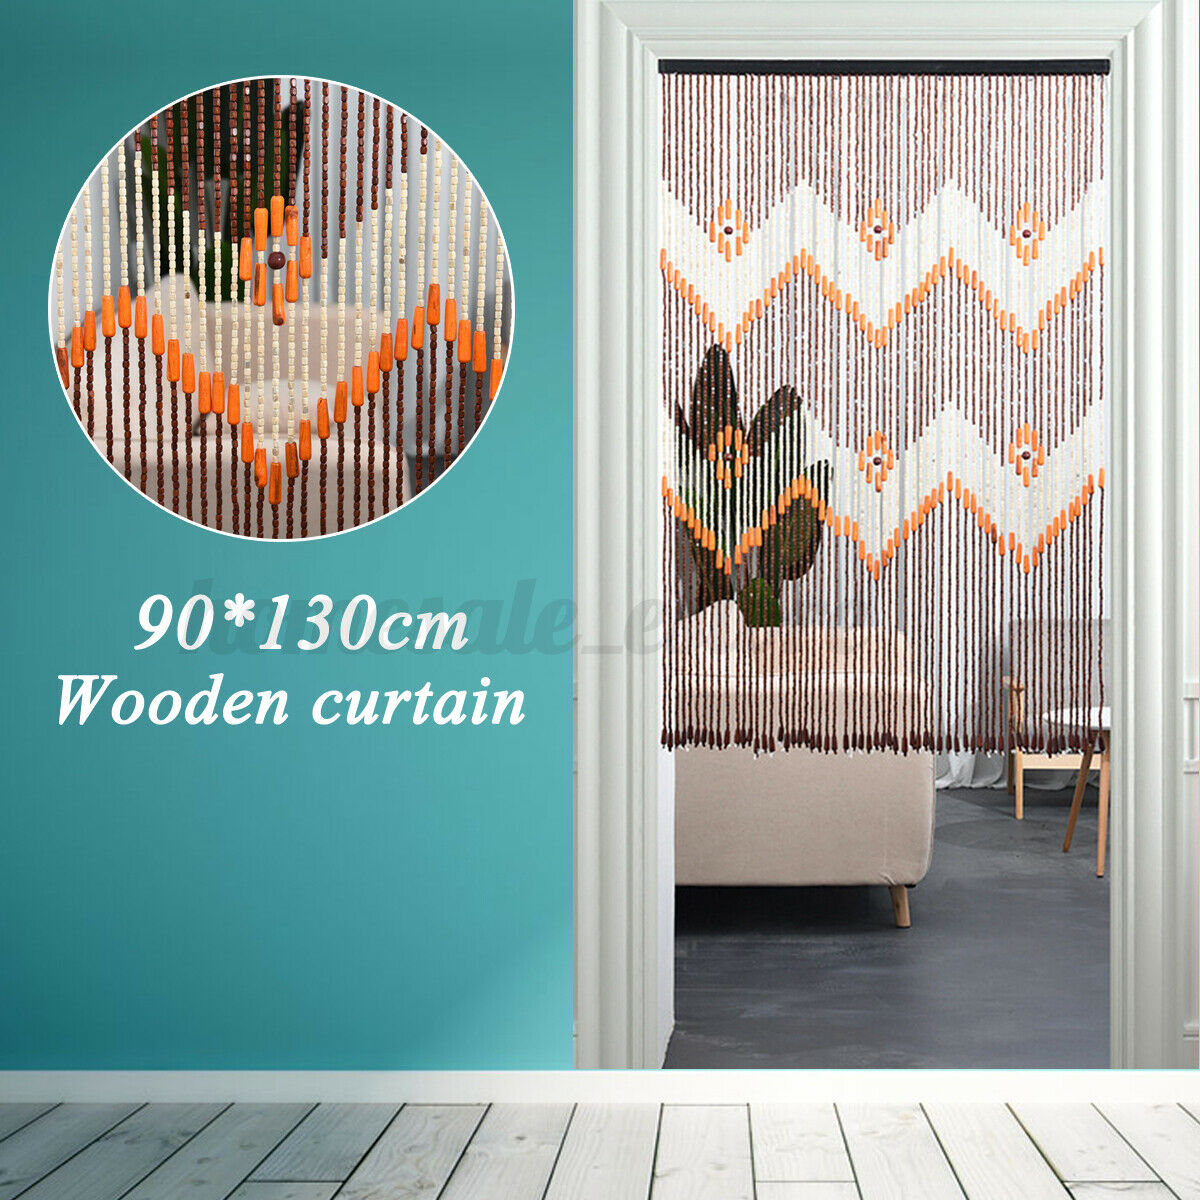 60 Line Wooden Bead Curtain Fly Screen Decor Porch Bedroom Living Room 90*130cm